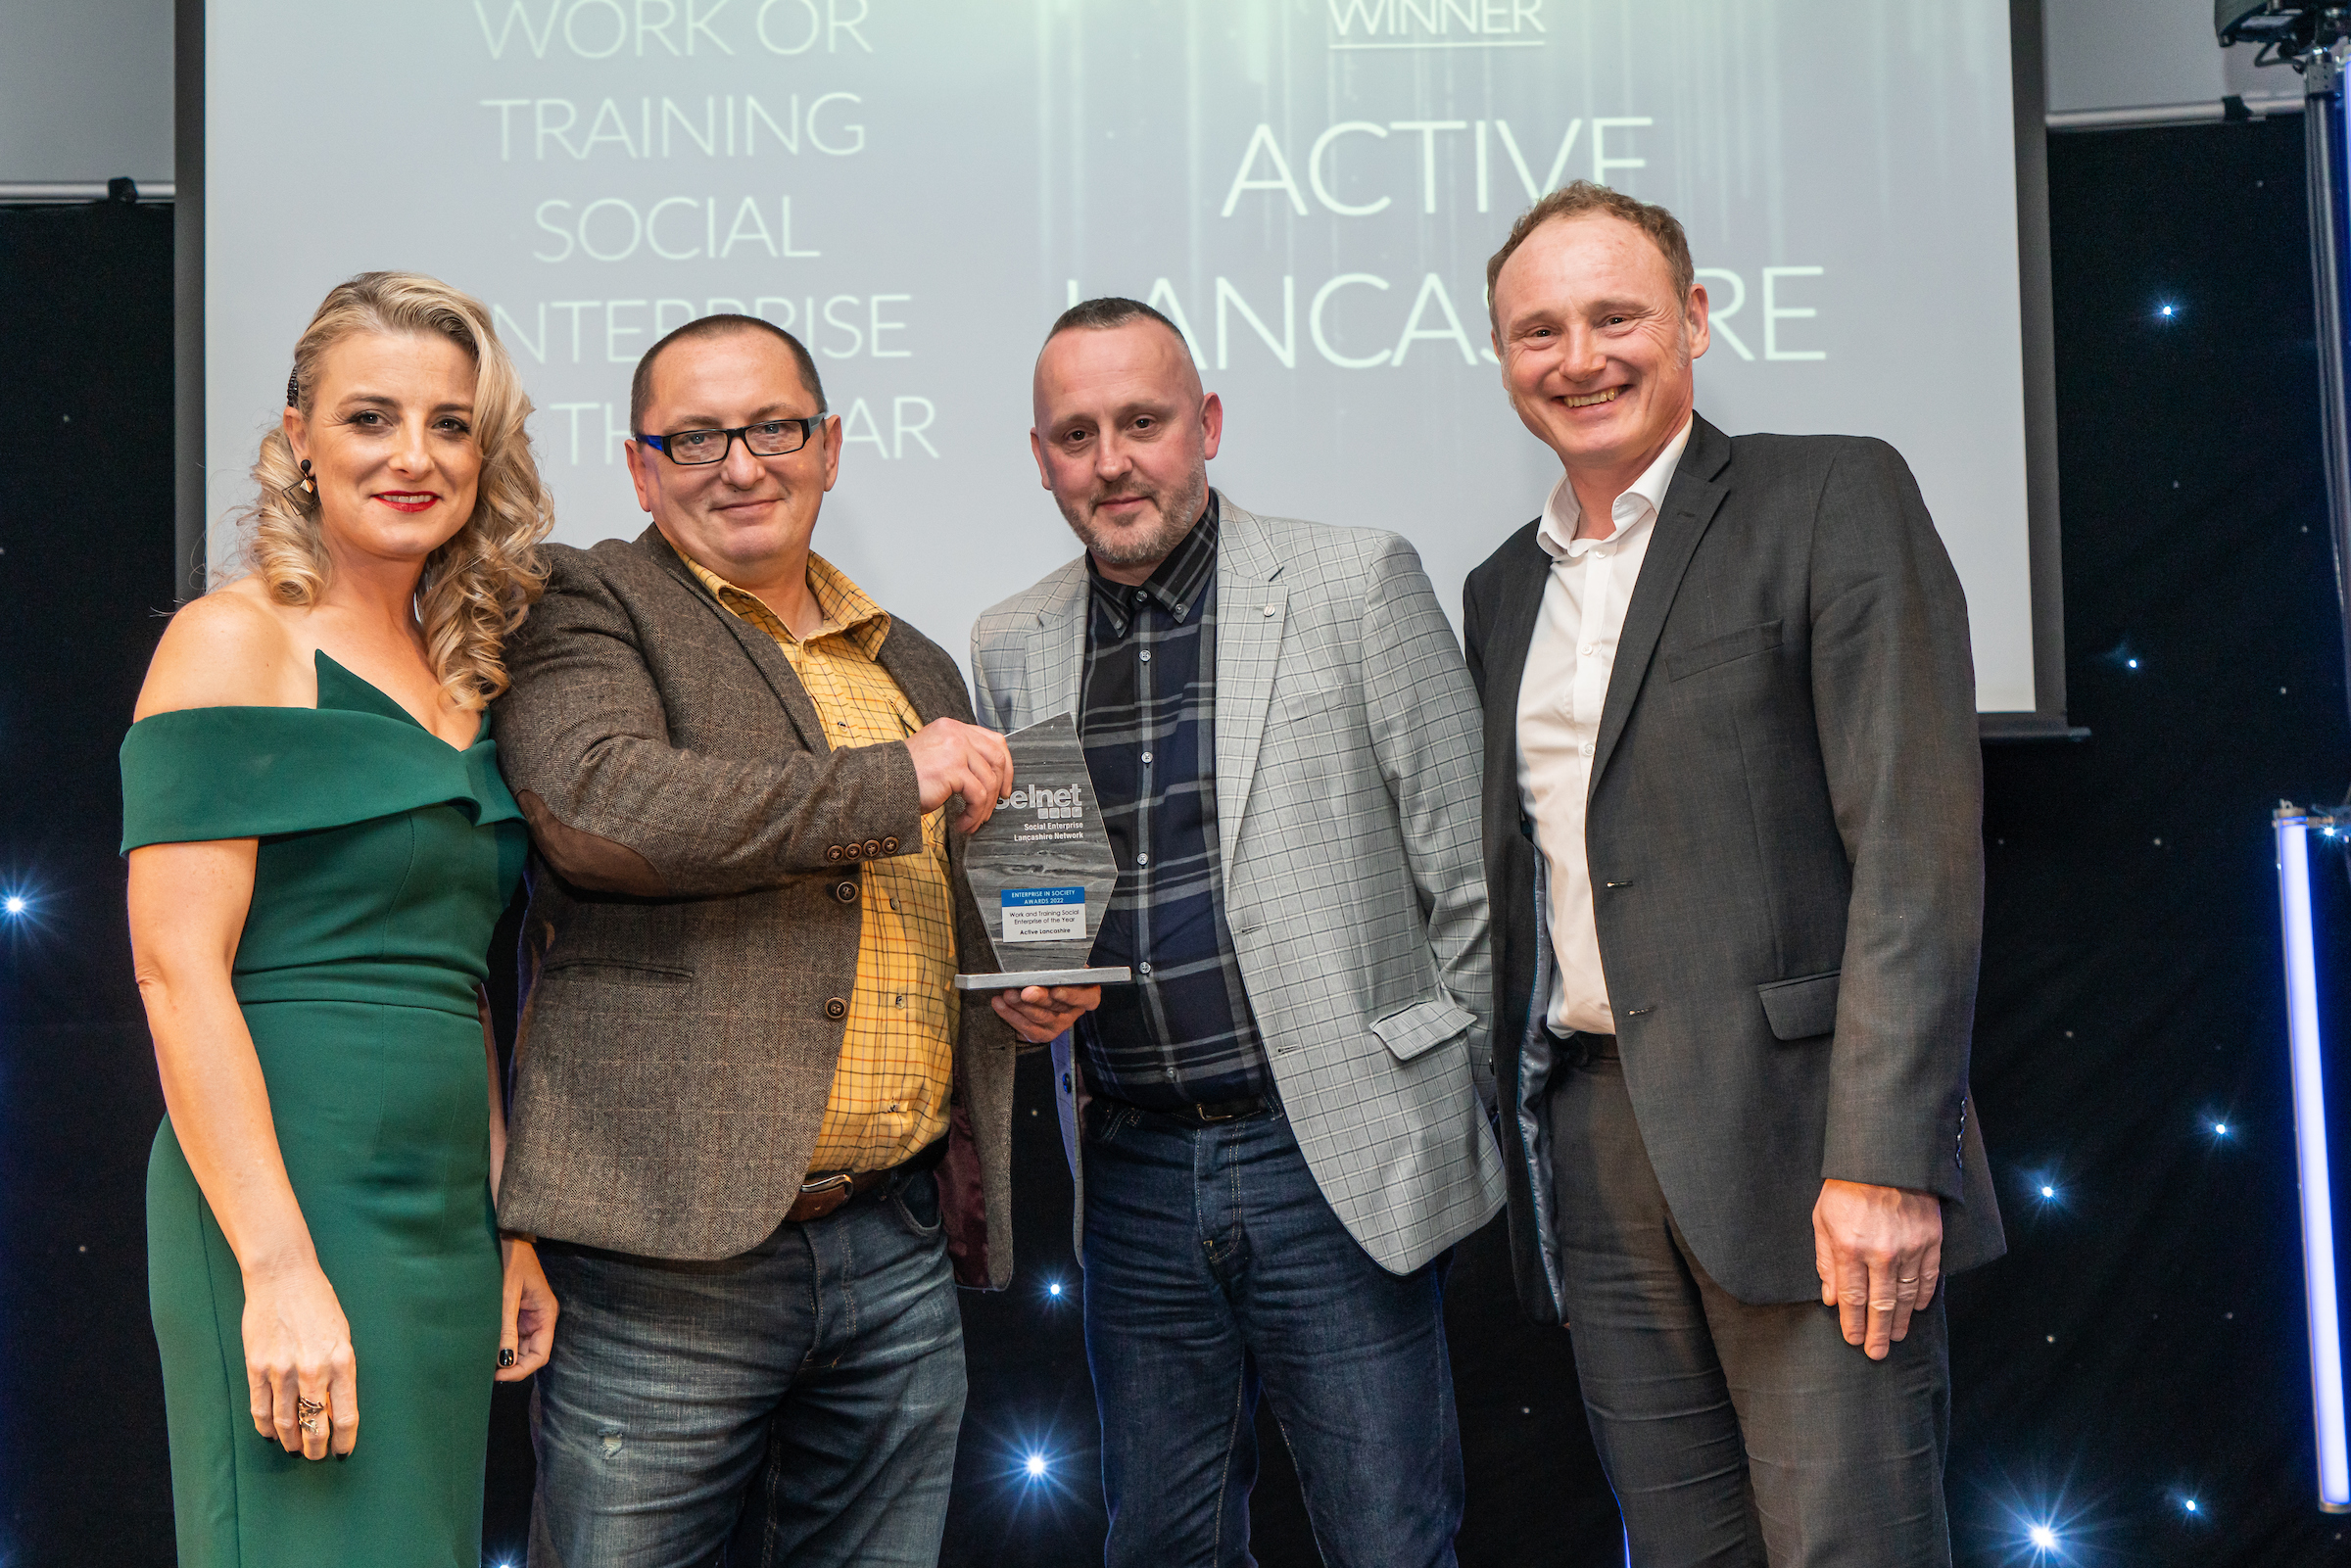 Accepting the award from Donna Sadler (SELNET Deputy CEO & Partnership Manager) was Paul Becouarn (Rossendale Works Project Officer), Dave Marshall (Pendle YES Hub Project Lead) and Adrian Leather (Active Lancashire CEO).